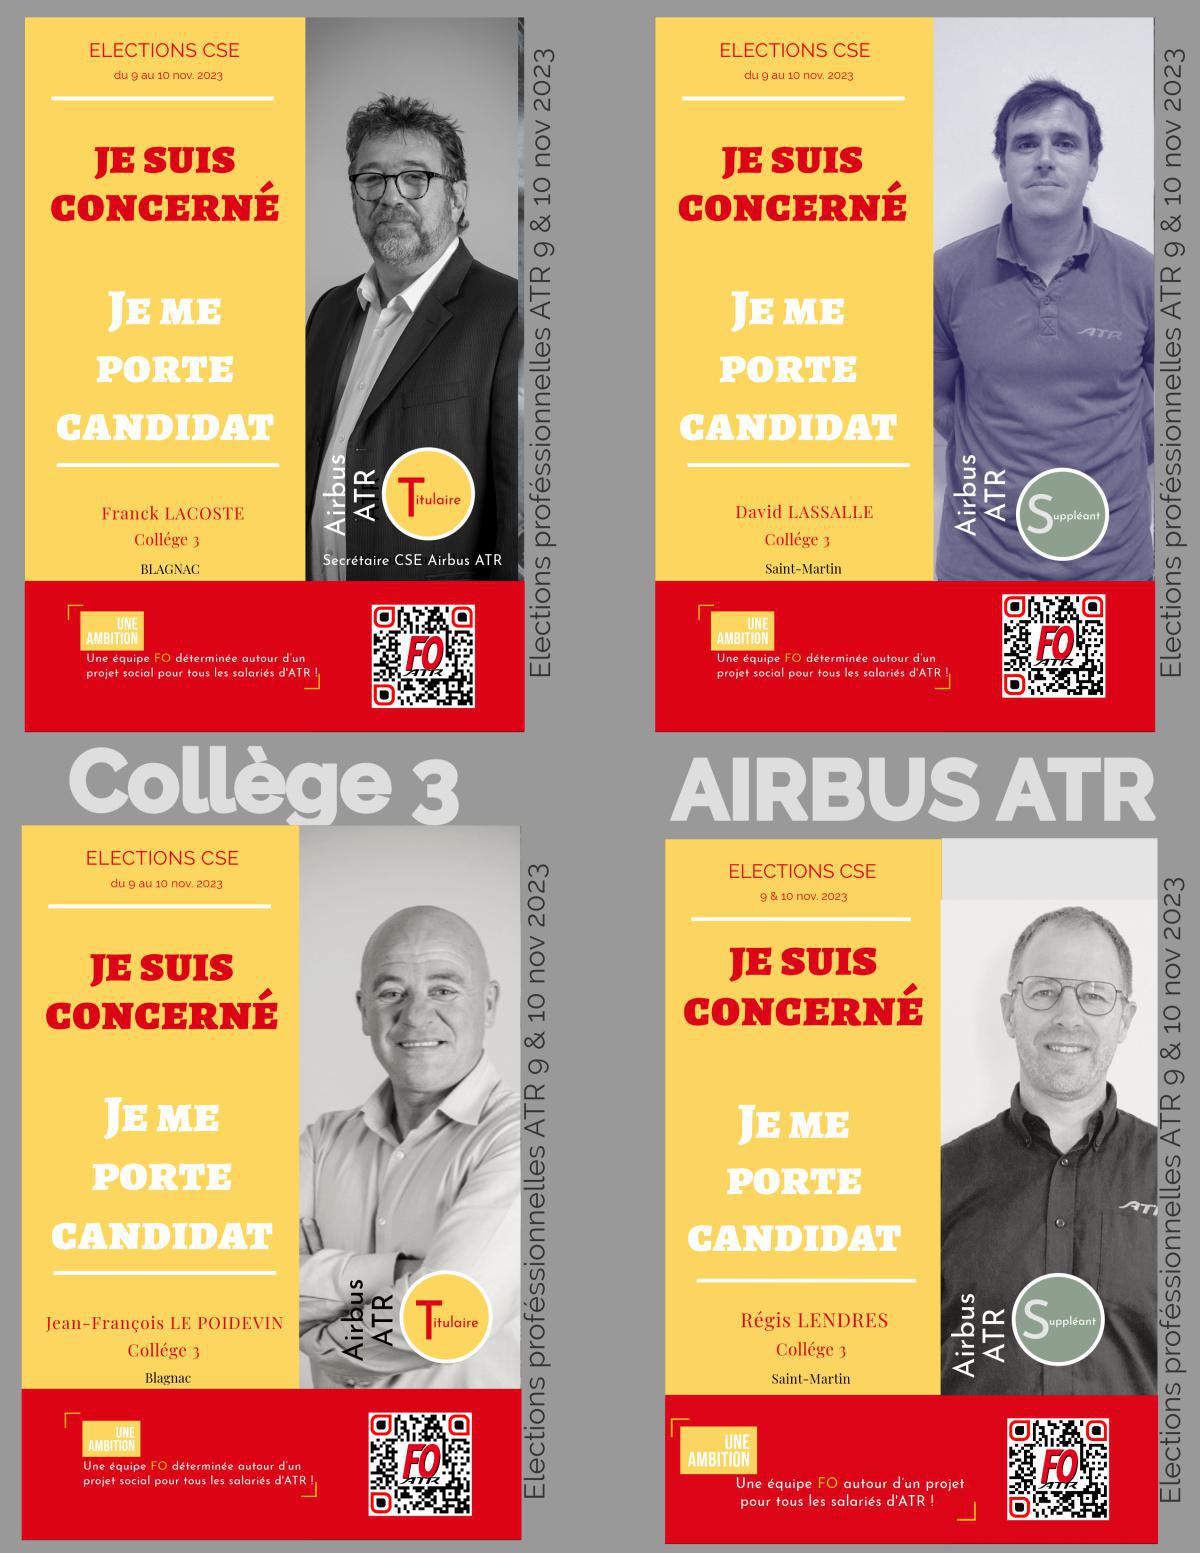 J-3 : Airbus ATR, vos candidat(e)s FO (collège 2 & 3)